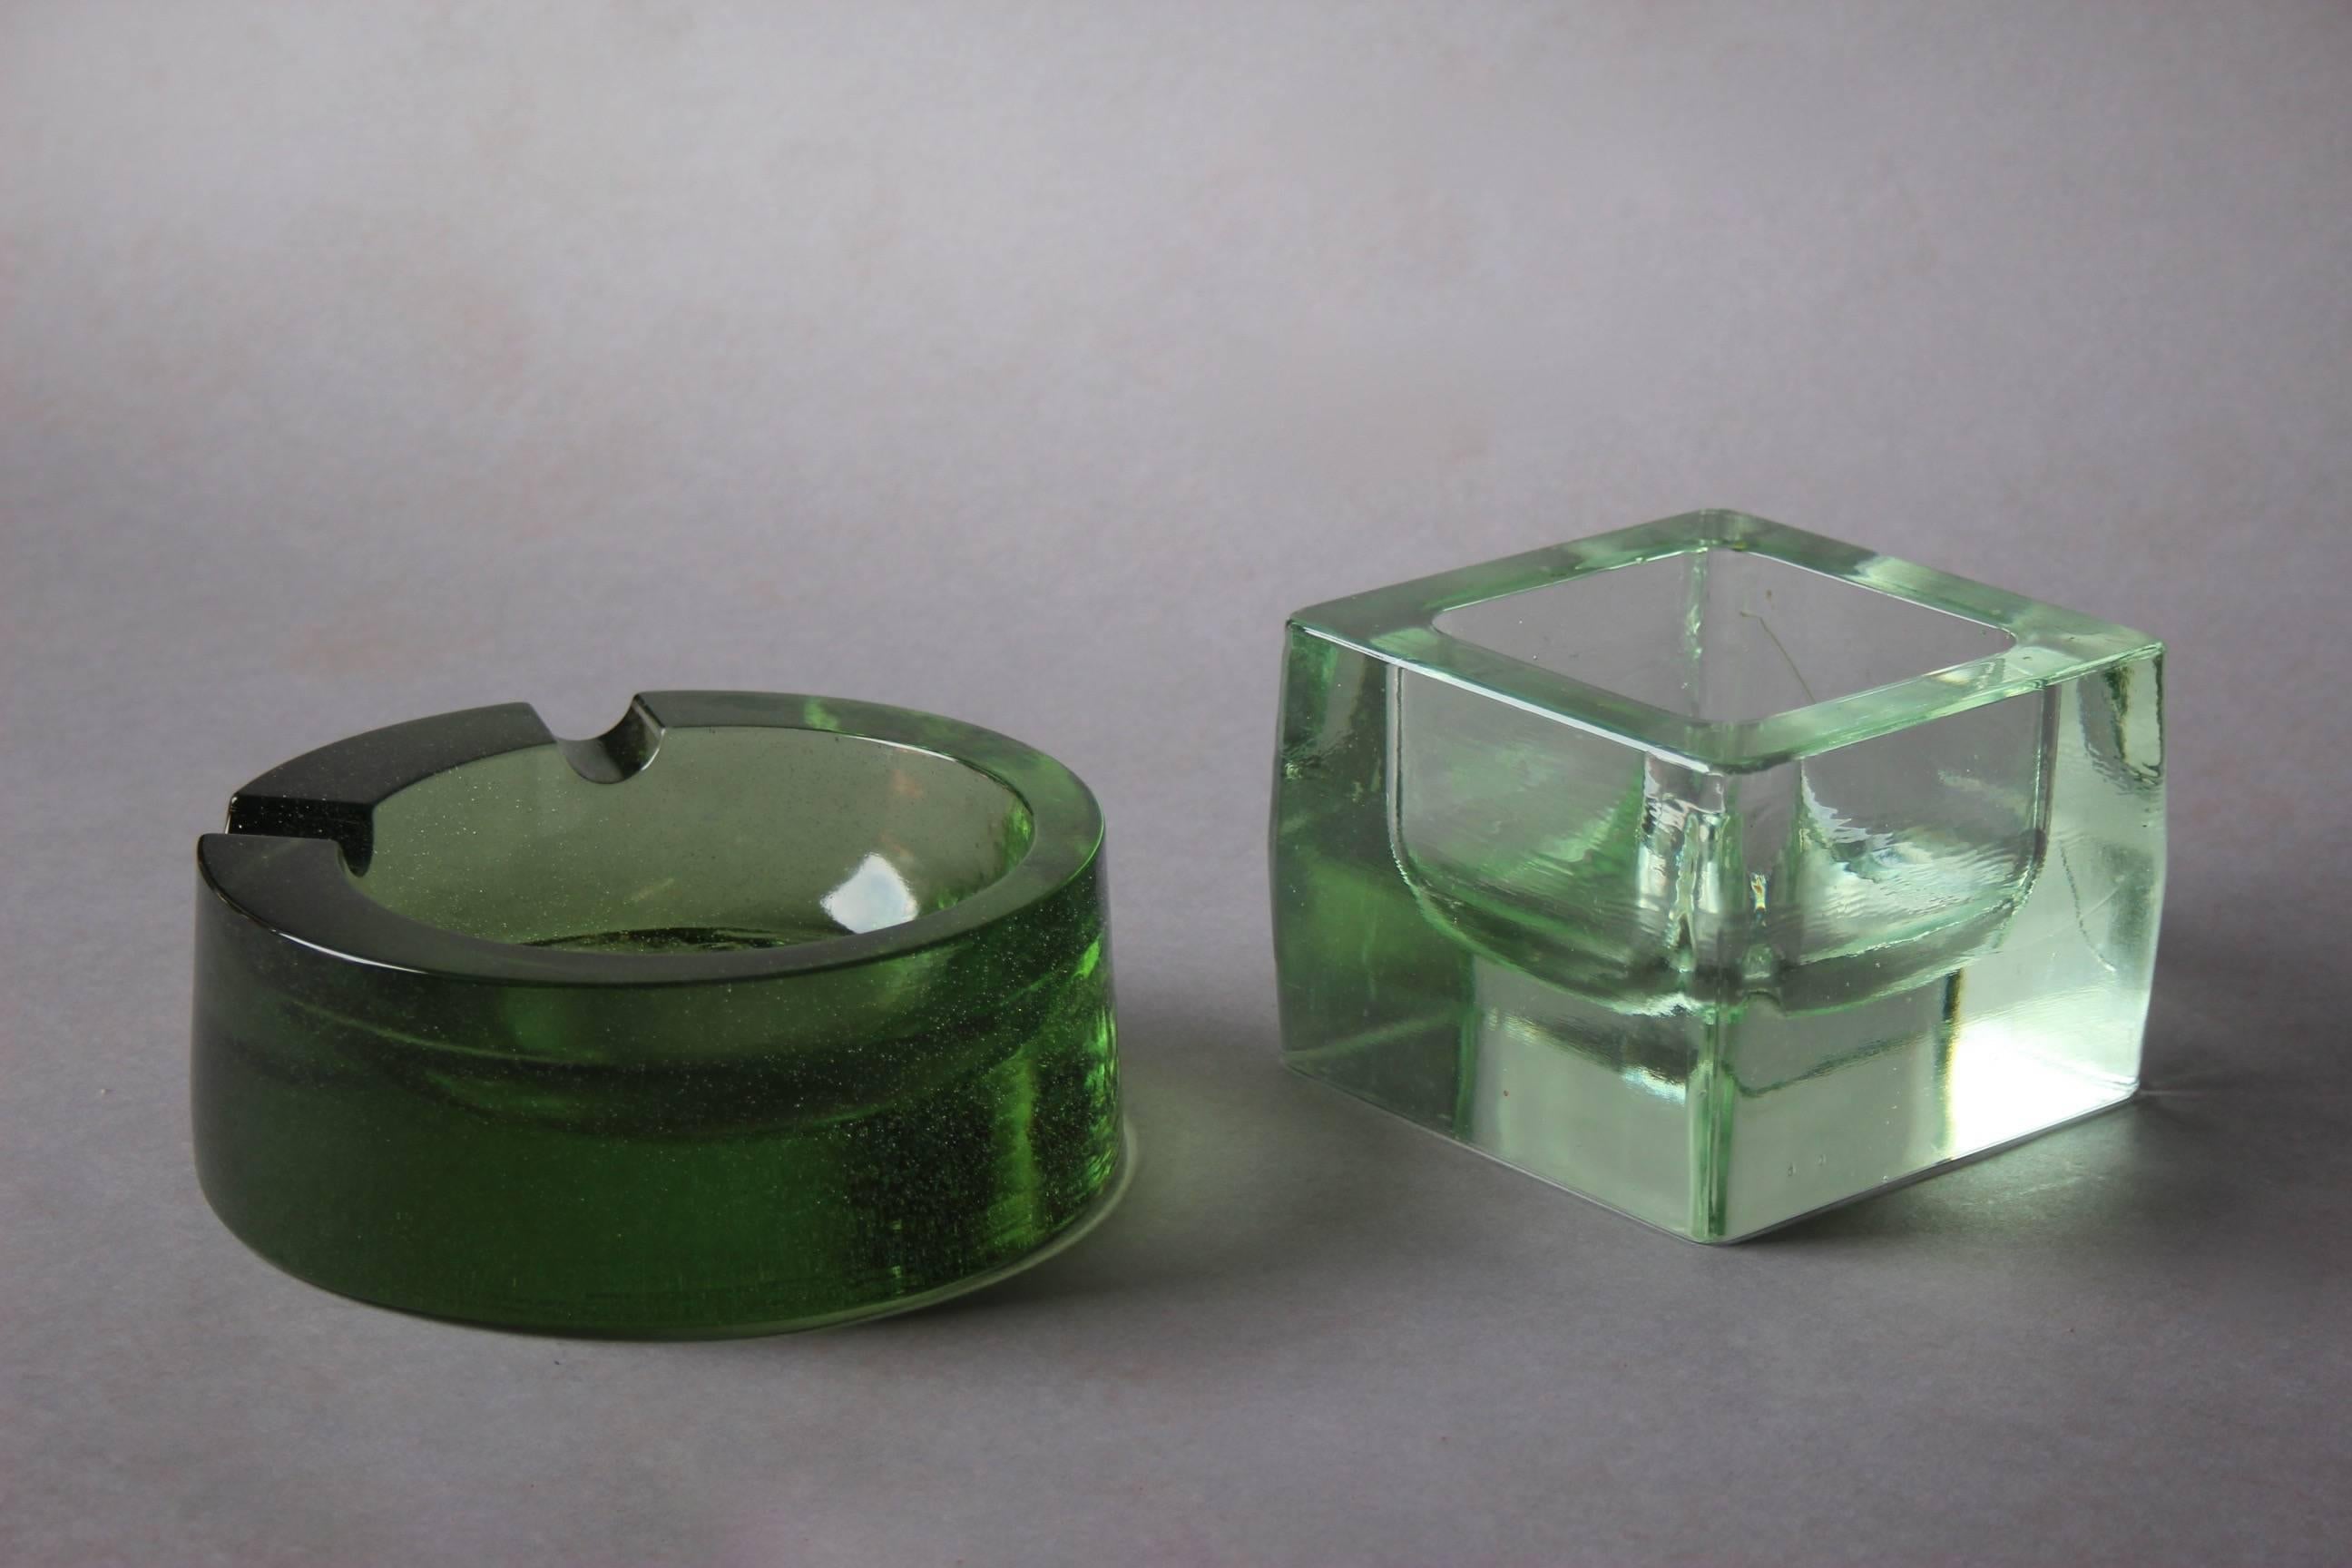 Two glass big cendrier one round, measures: H 7, D 18 second is square H 10, 13 by 13.